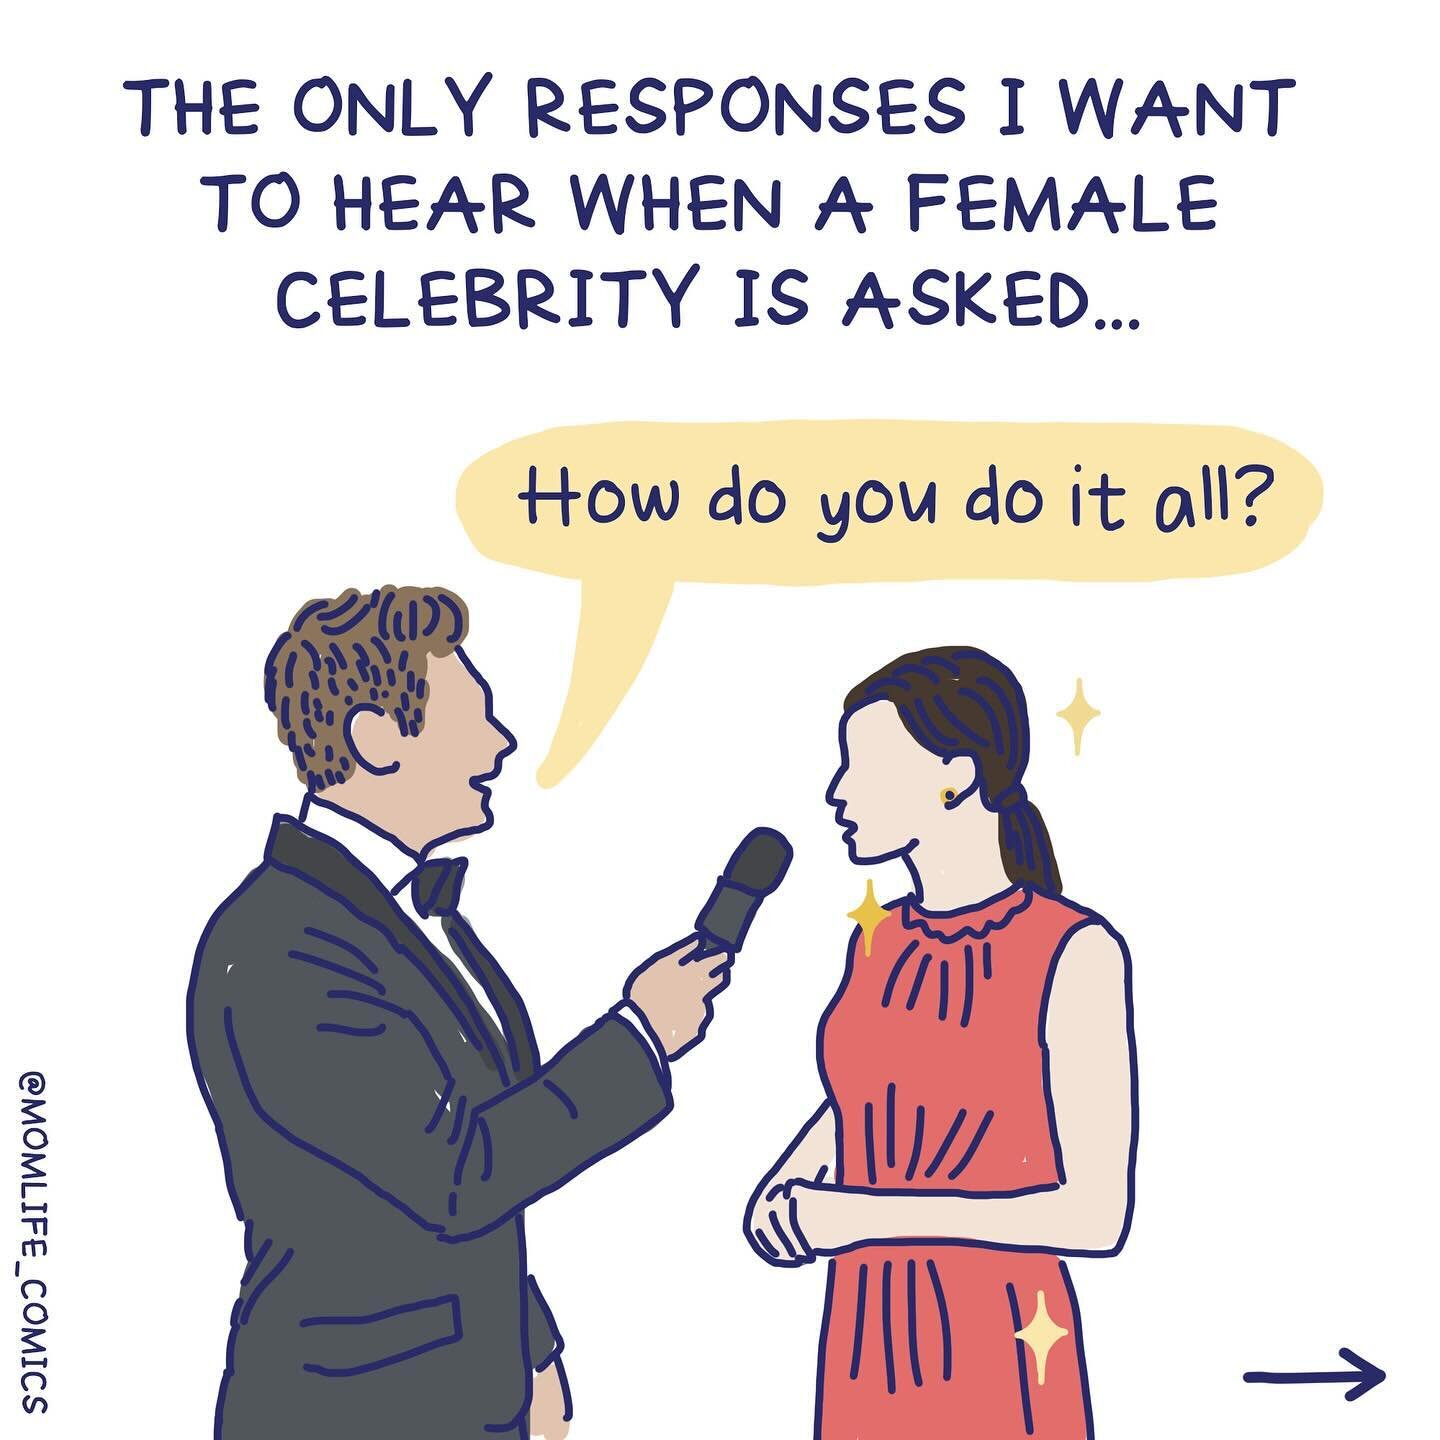 Reposting this one from last year in honor of the Oscars tonight {let&rsquo;s see how many MEN get asked this question, shall we?}&hellip;

Share your favorite responses to this question below&hellip;👇
.
.
.
.
.

#motherhoodlife #realmotherhood #hon